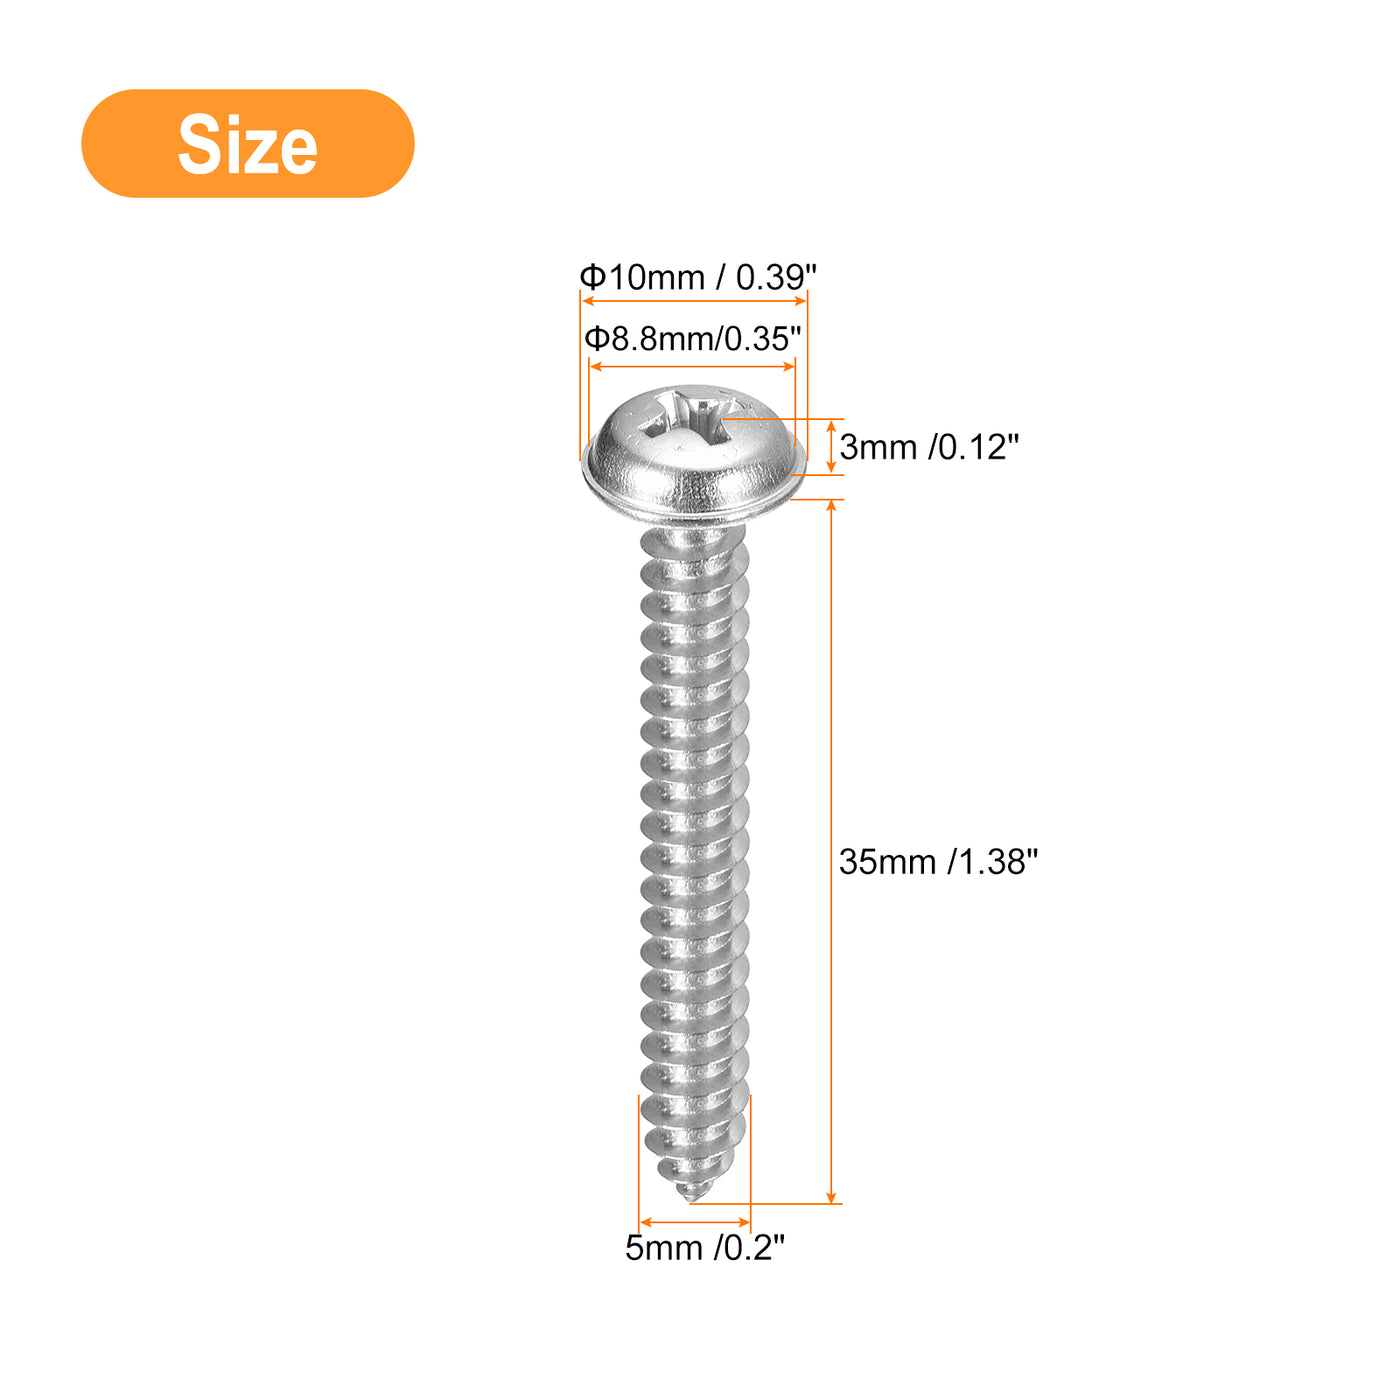 uxcell Uxcell ST5x35mm Phillips Pan Head Self-tapping Screw with Washer, 100pcs - 304 Stainless Steel Wood Screw Full Thread (Silver)